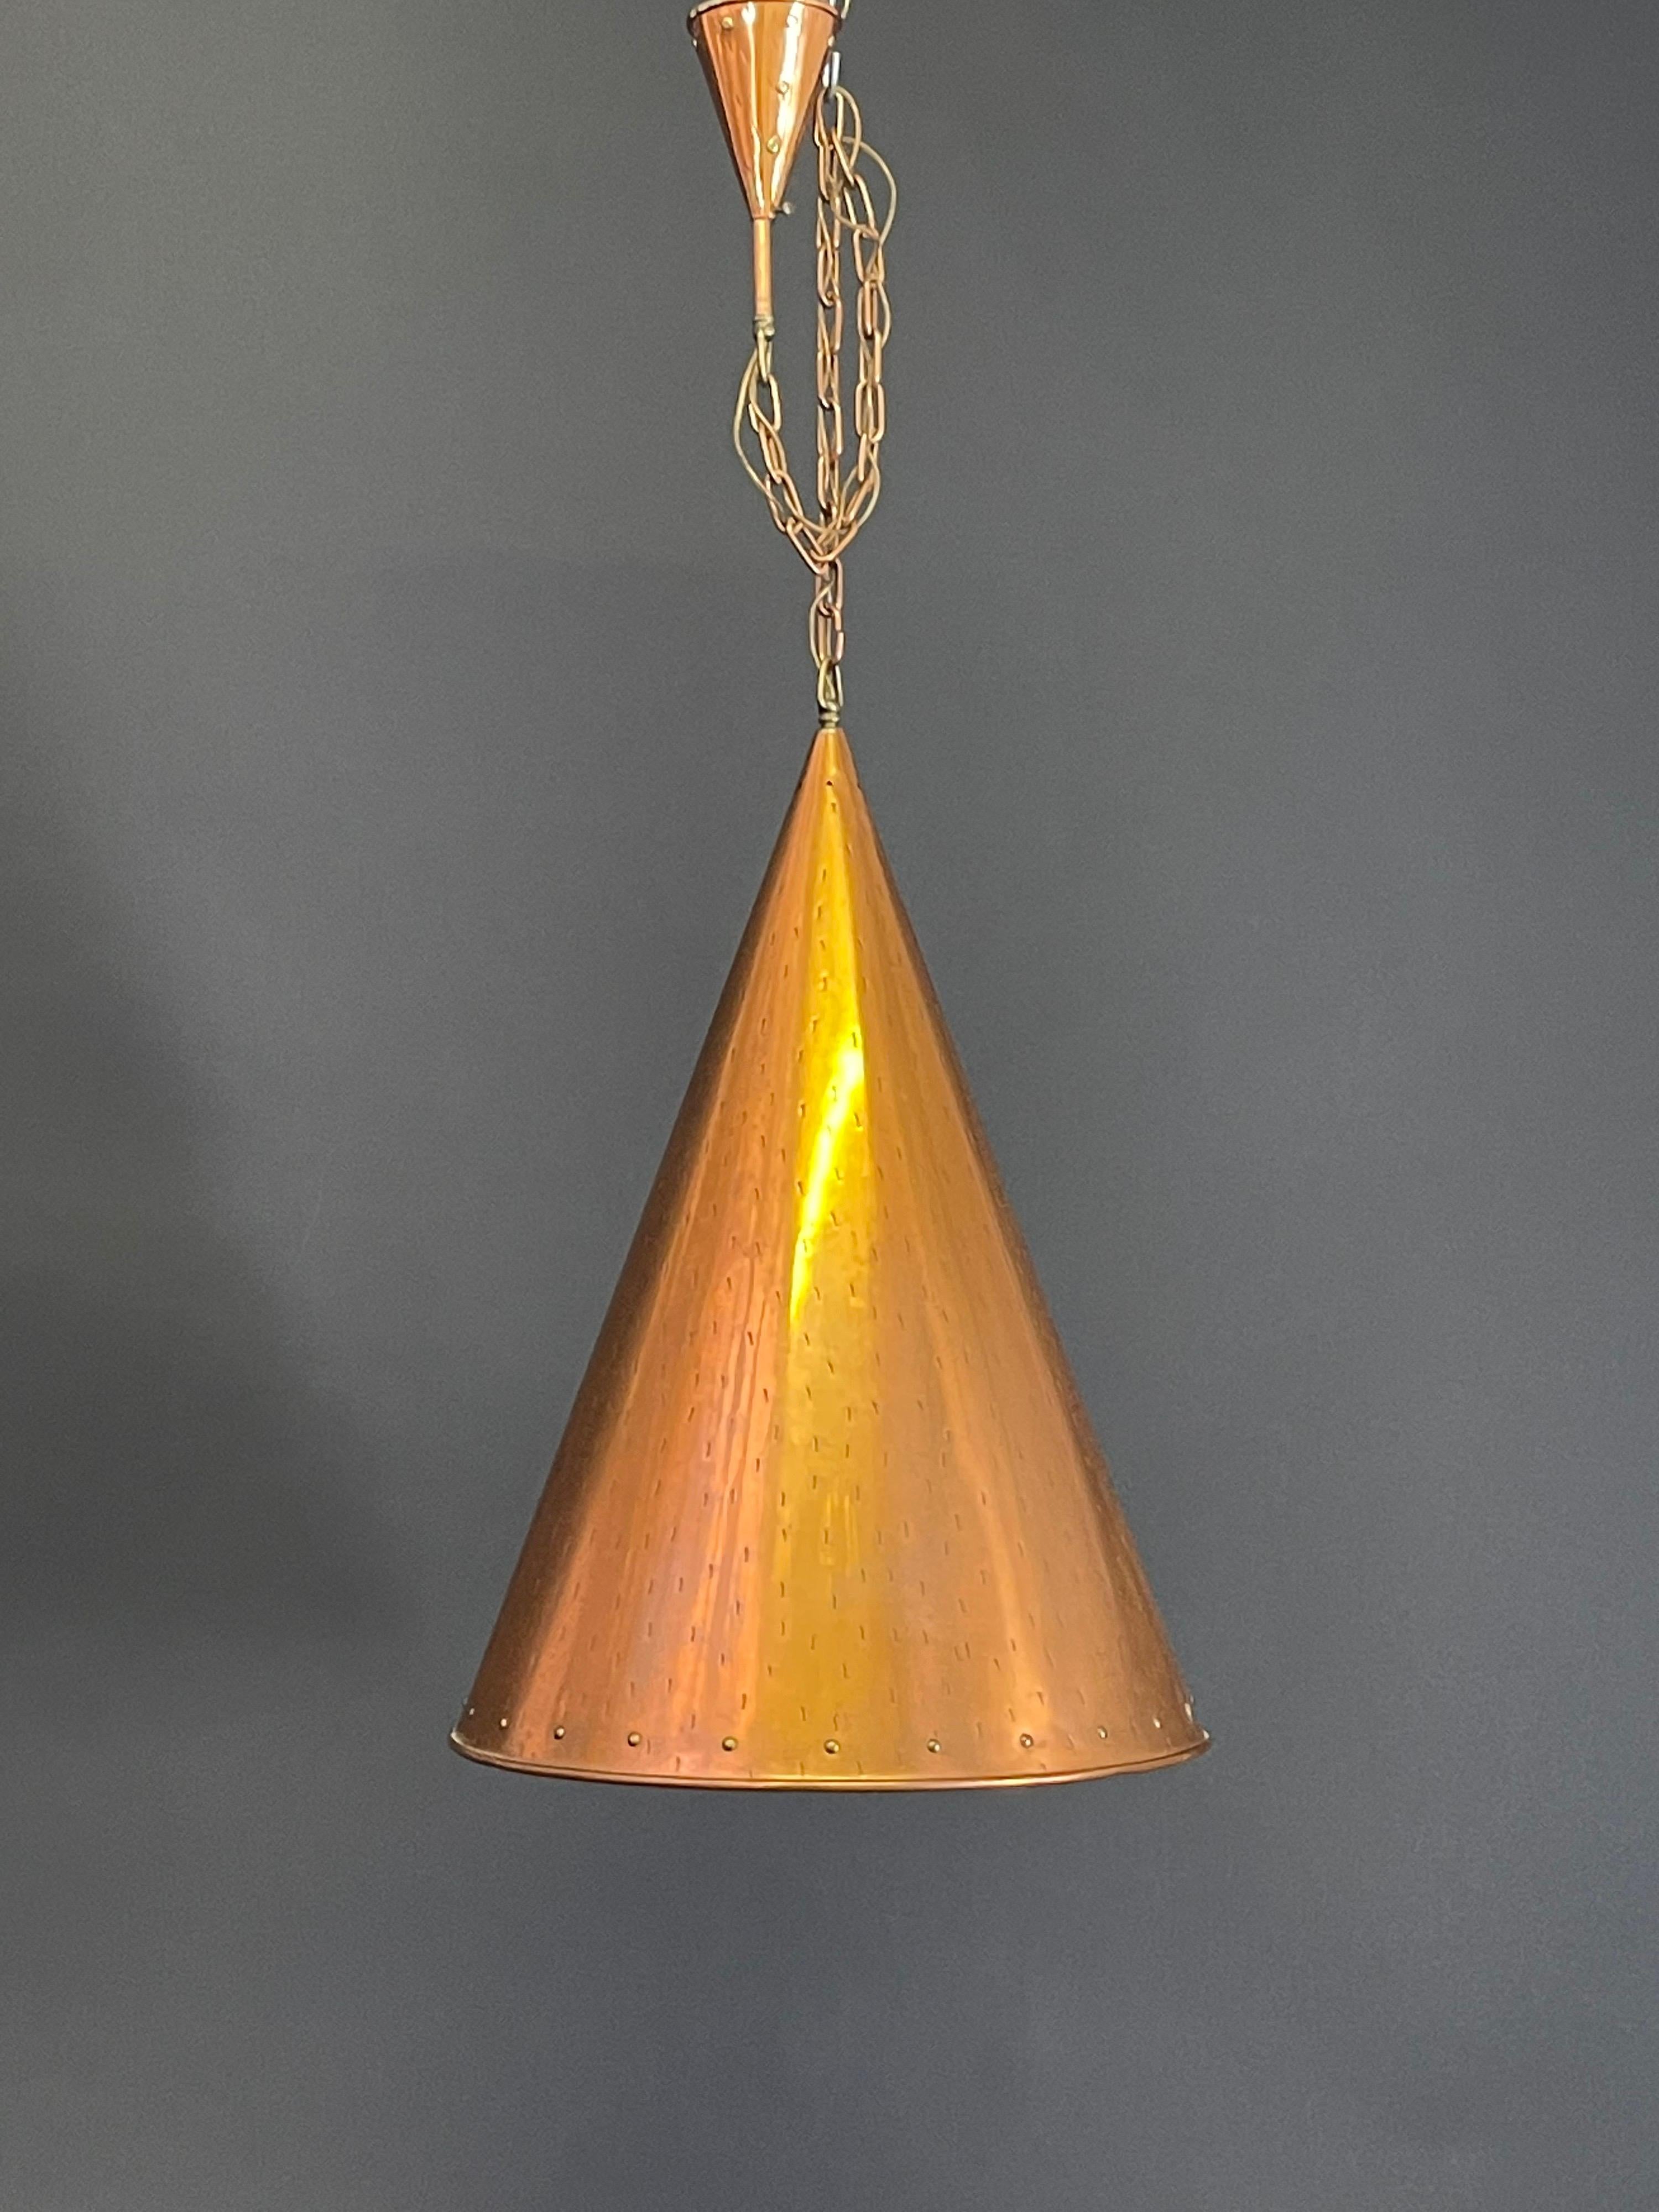 An extra large Mid-Century Modern pendant light by Th.Valentiner, Denmark, circa 1970s.
Made of copper with brass accents hanging on a very long chain.
Socket: 1 x e27 bulb.